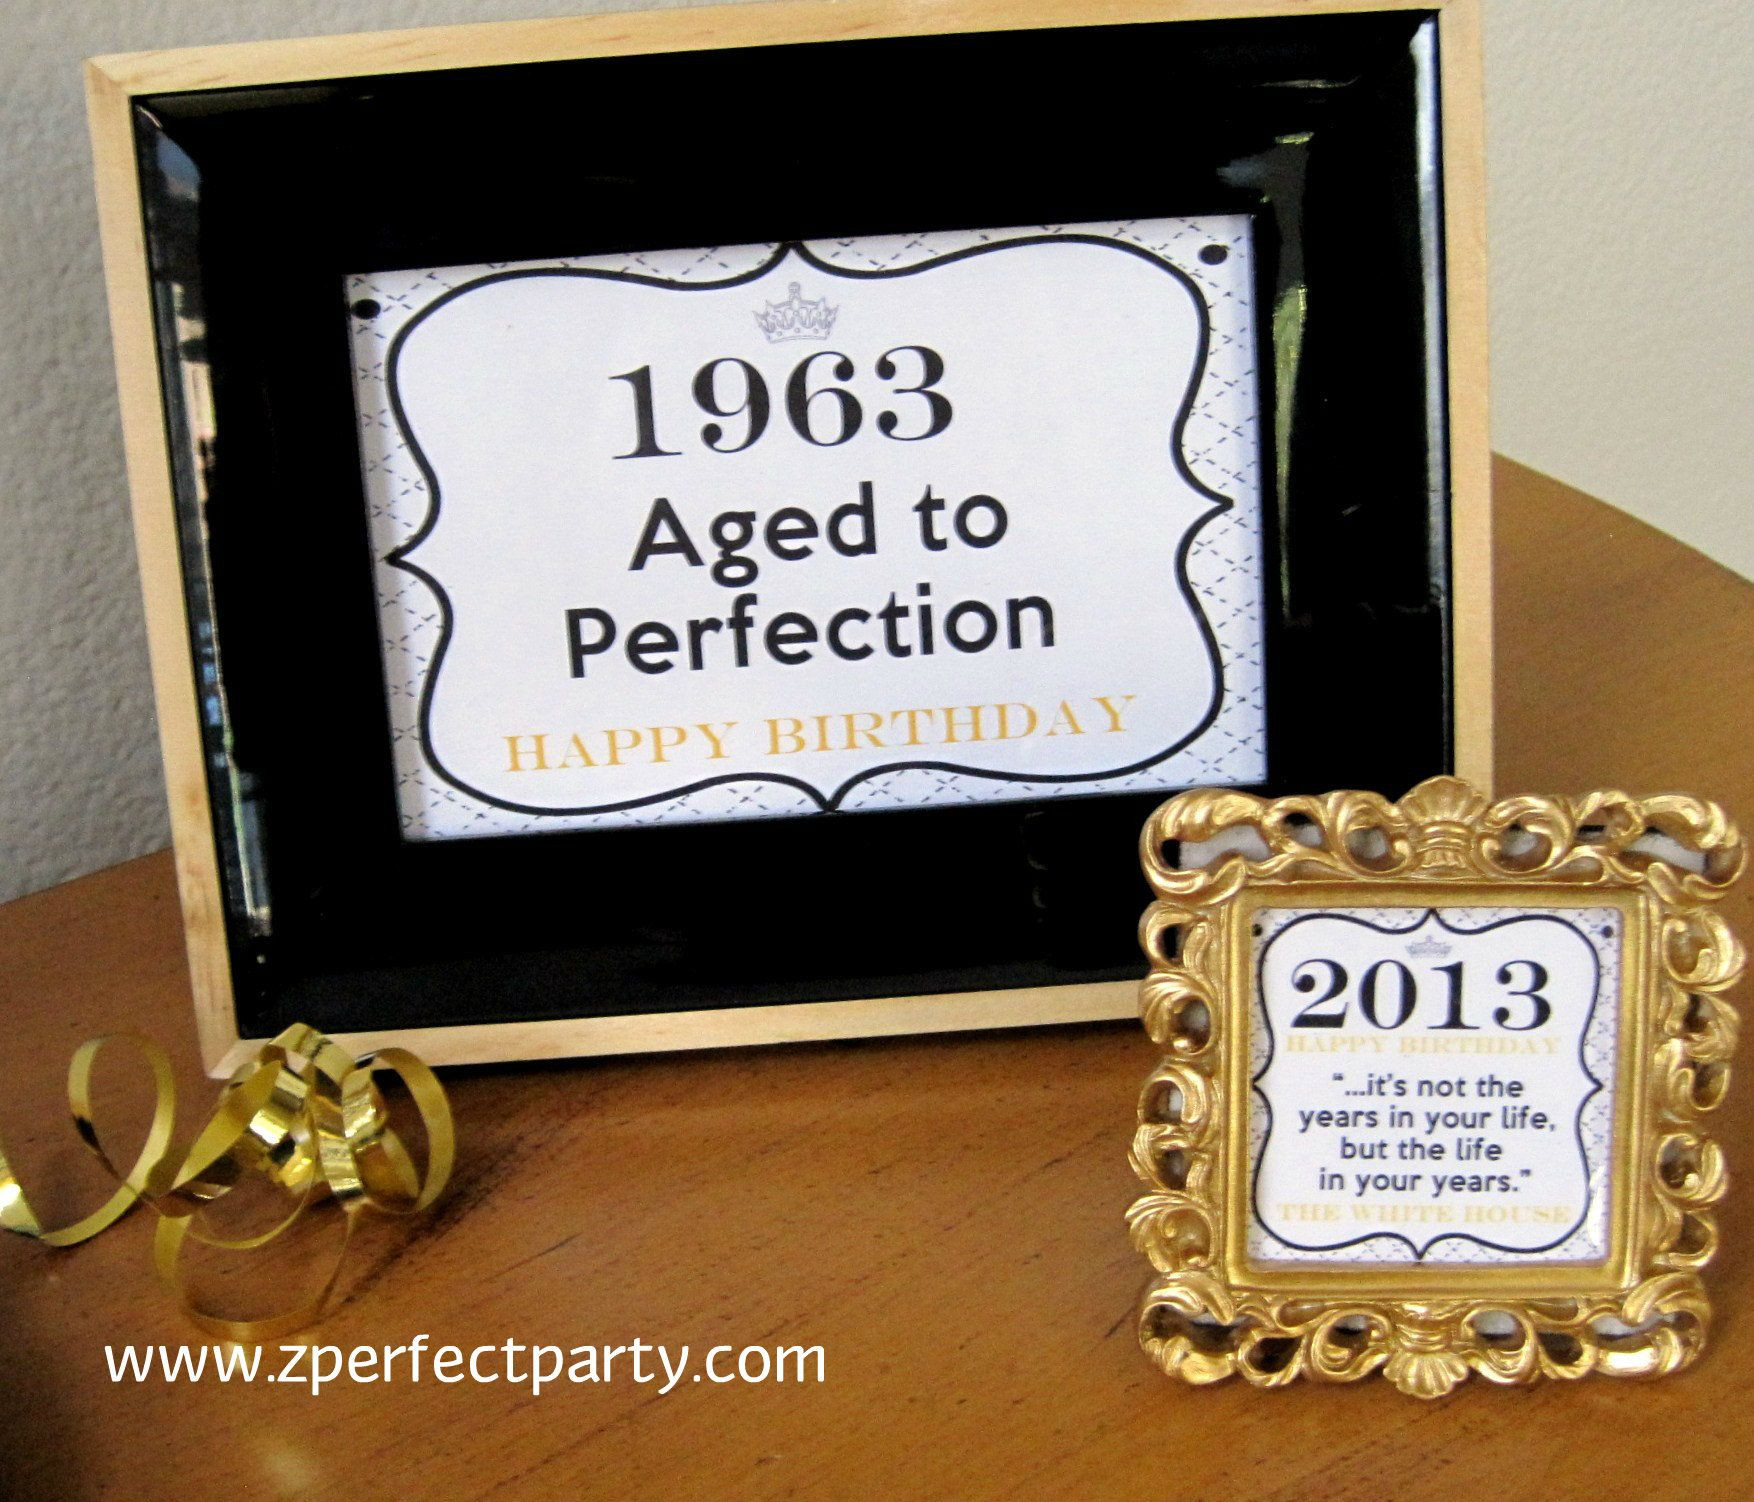 Best ideas about 50th Birthday Gifts For Mom
. Save or Pin mom s 50th int a plain frame print on cardstock Now.